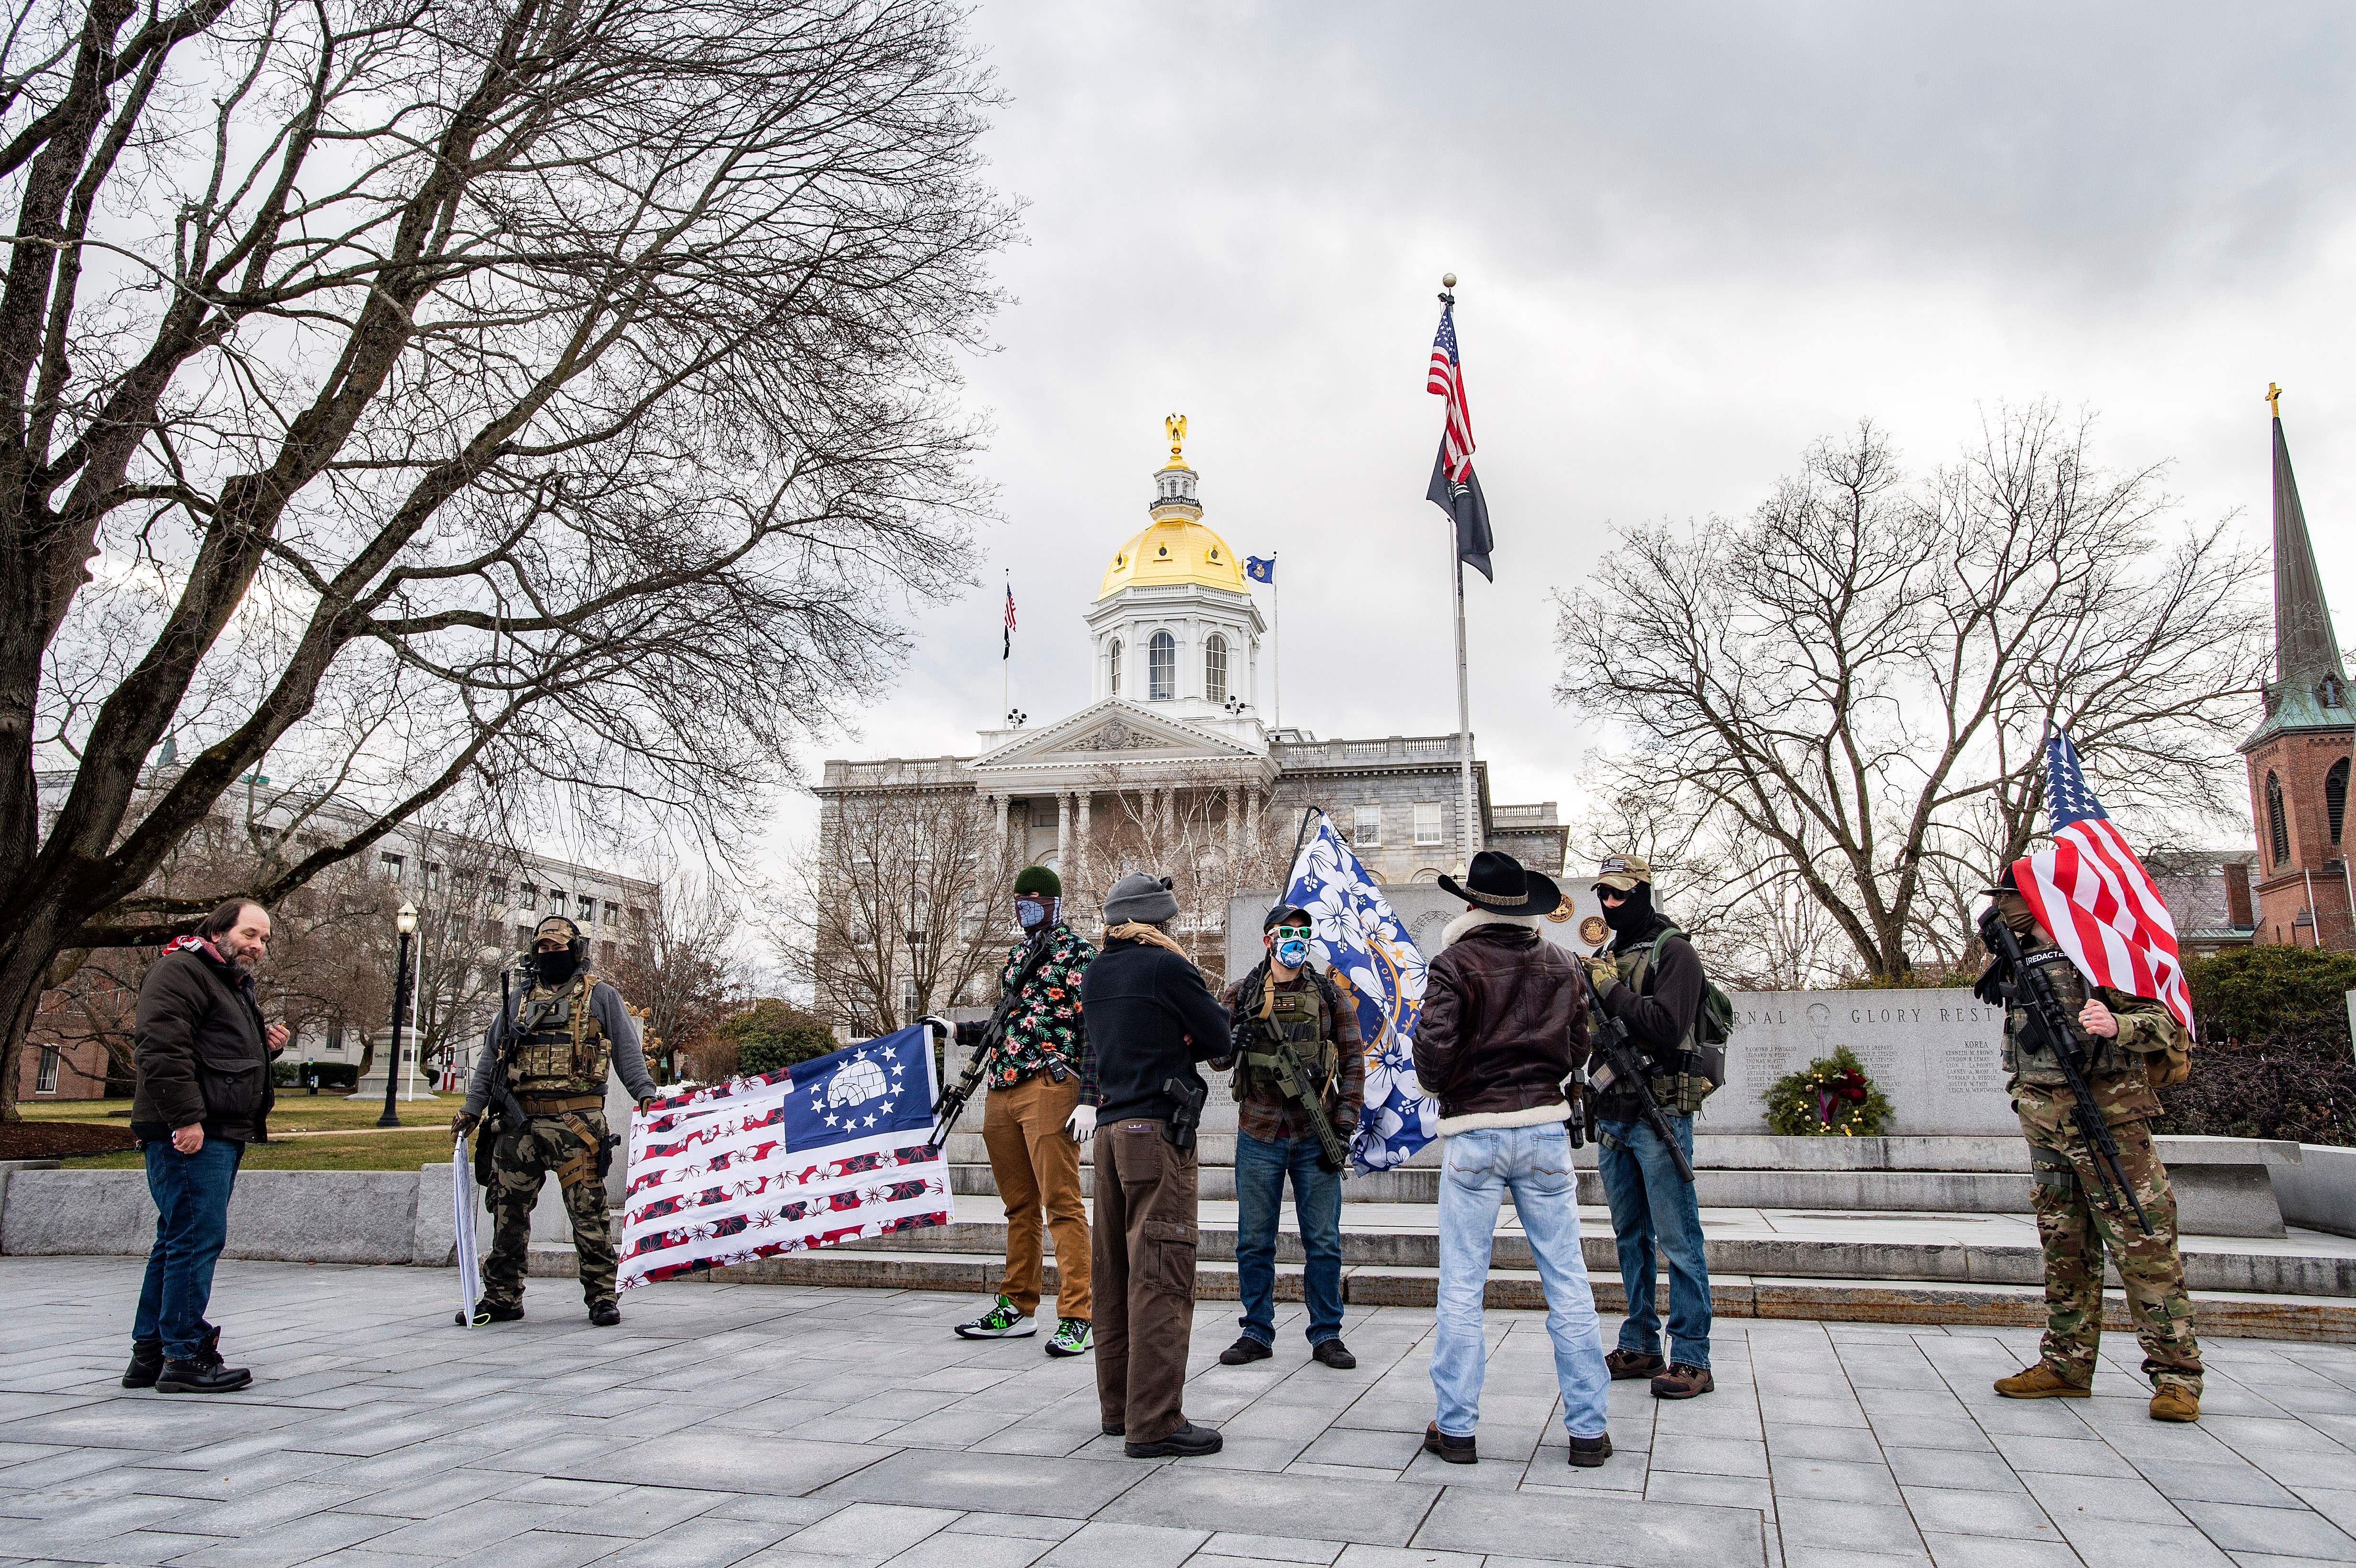 Armed members of the Boogaloo militia speak to people in front of the State Capital in Concord, New Hampshire on January 17